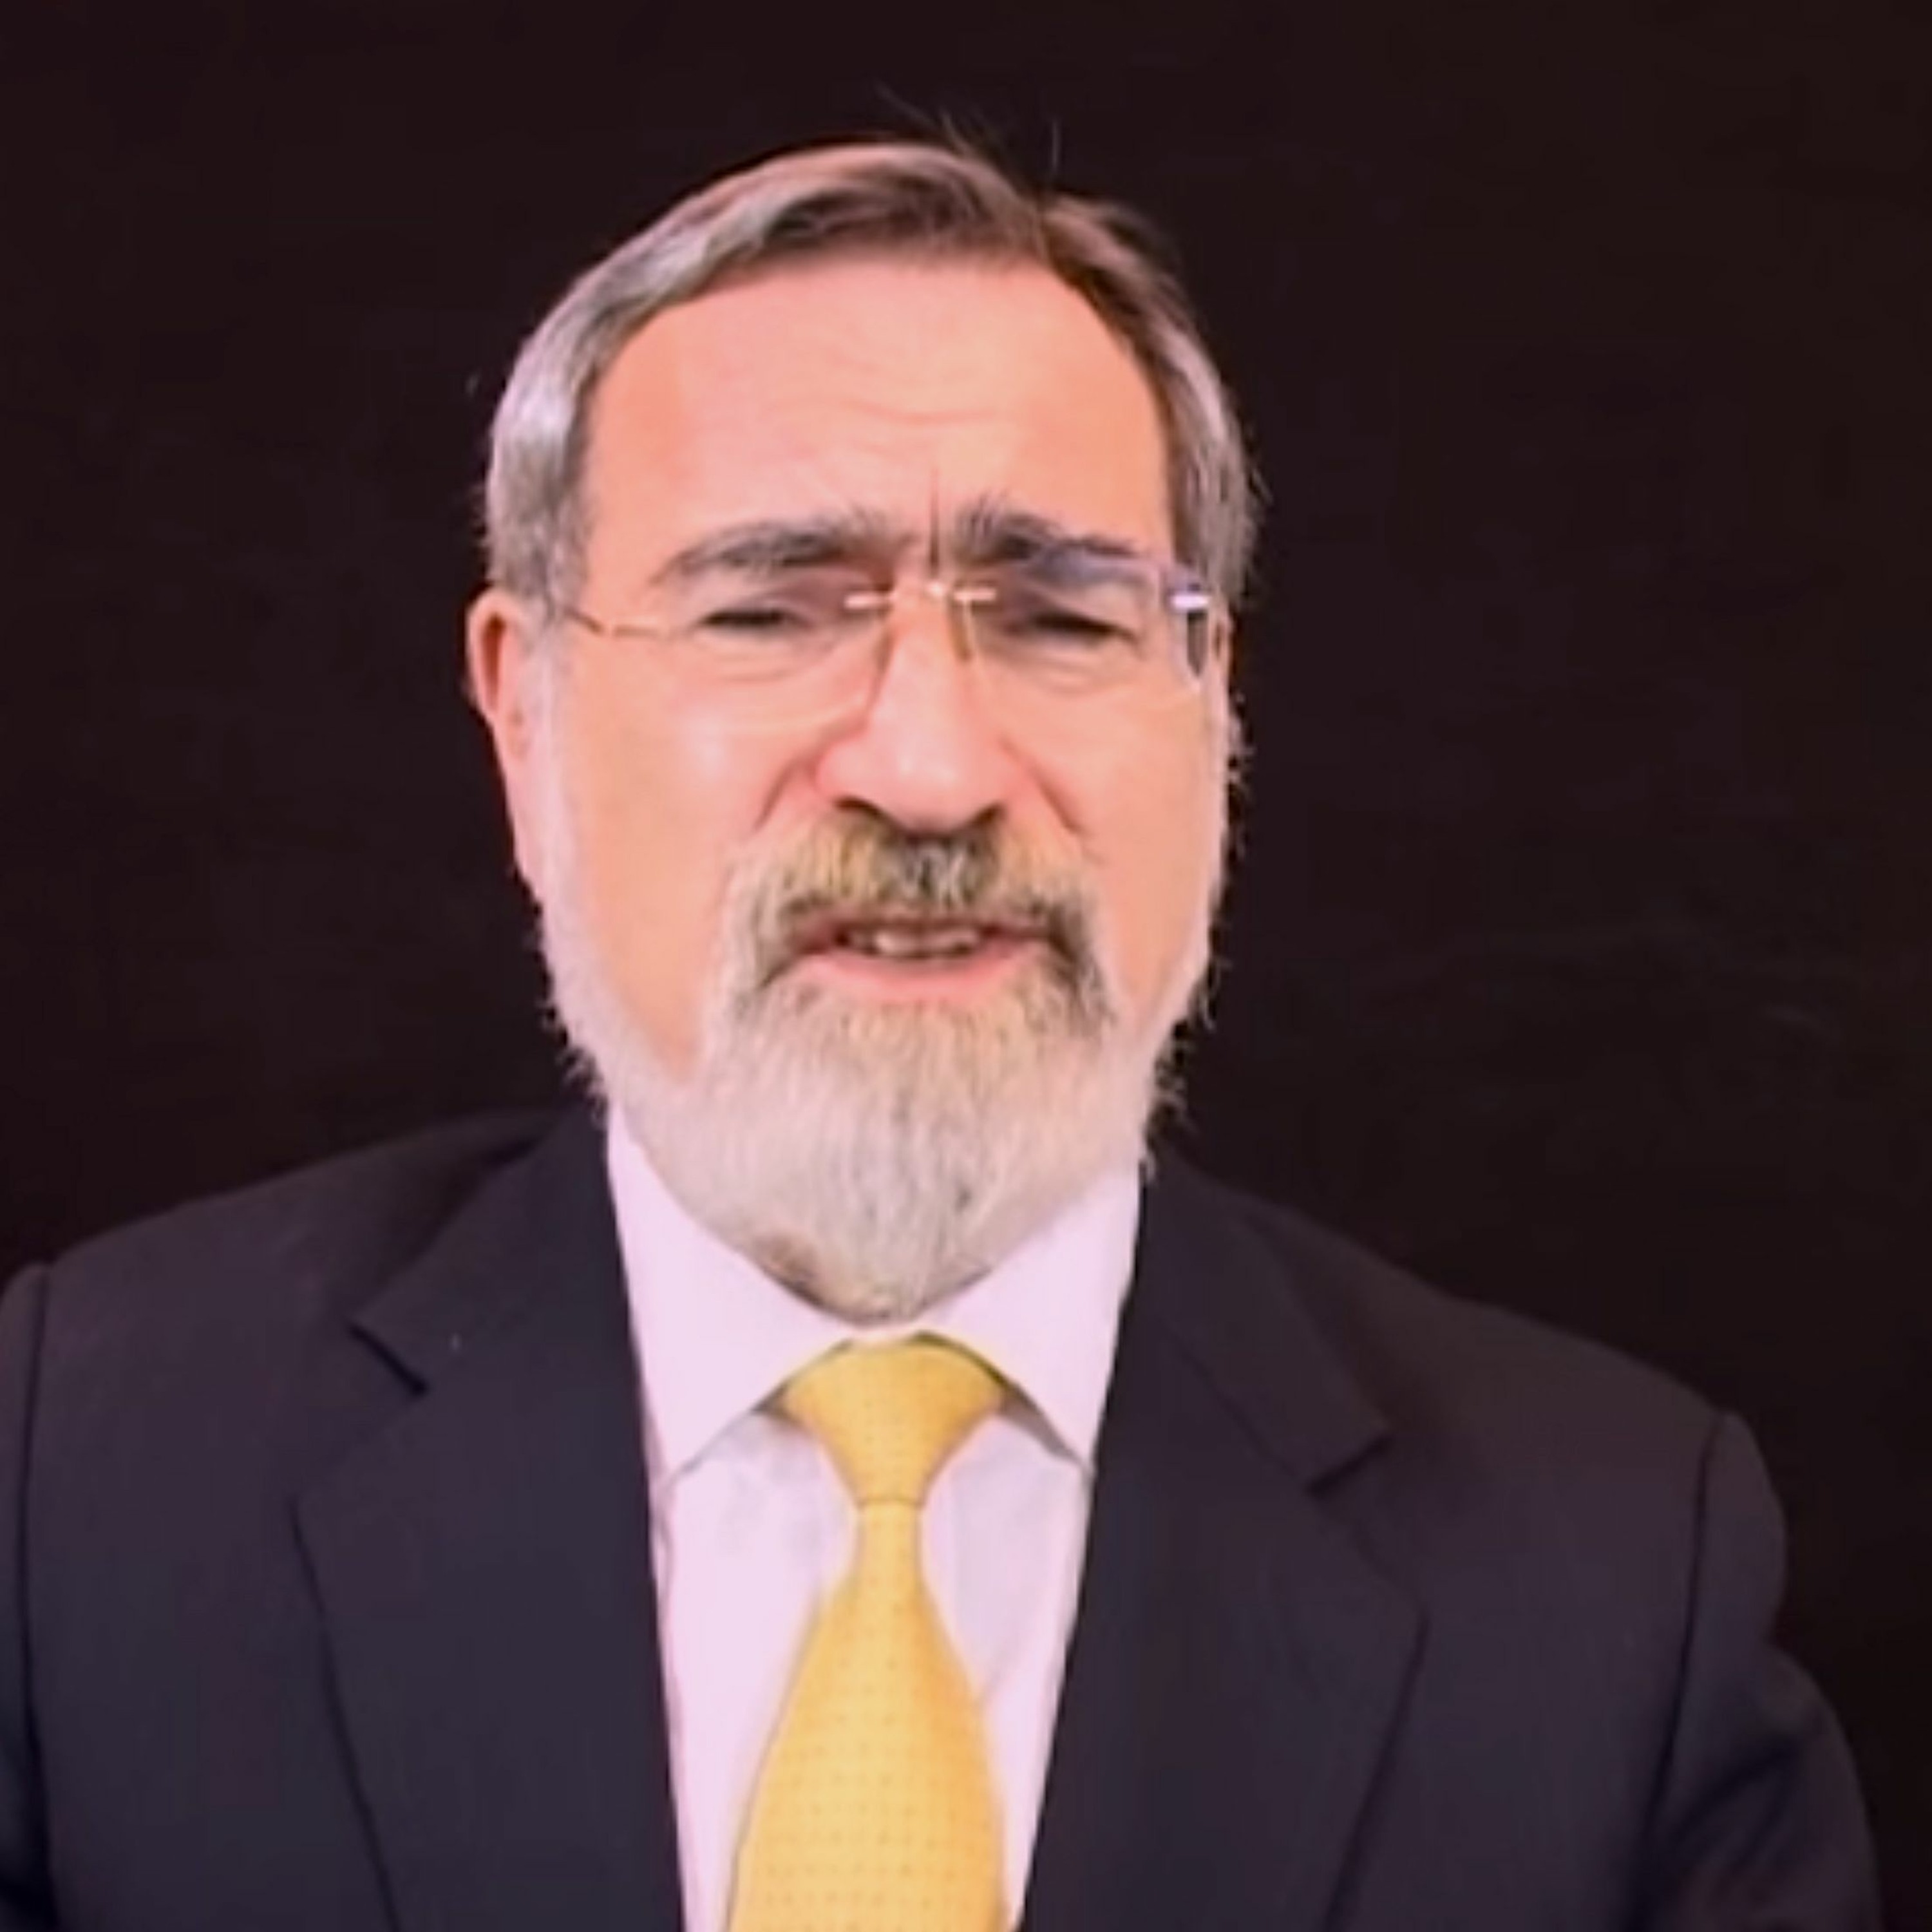 The God of Creation and the Land of Israel (Rabbi Sacks on Bereishit, Covenant & Conversation)